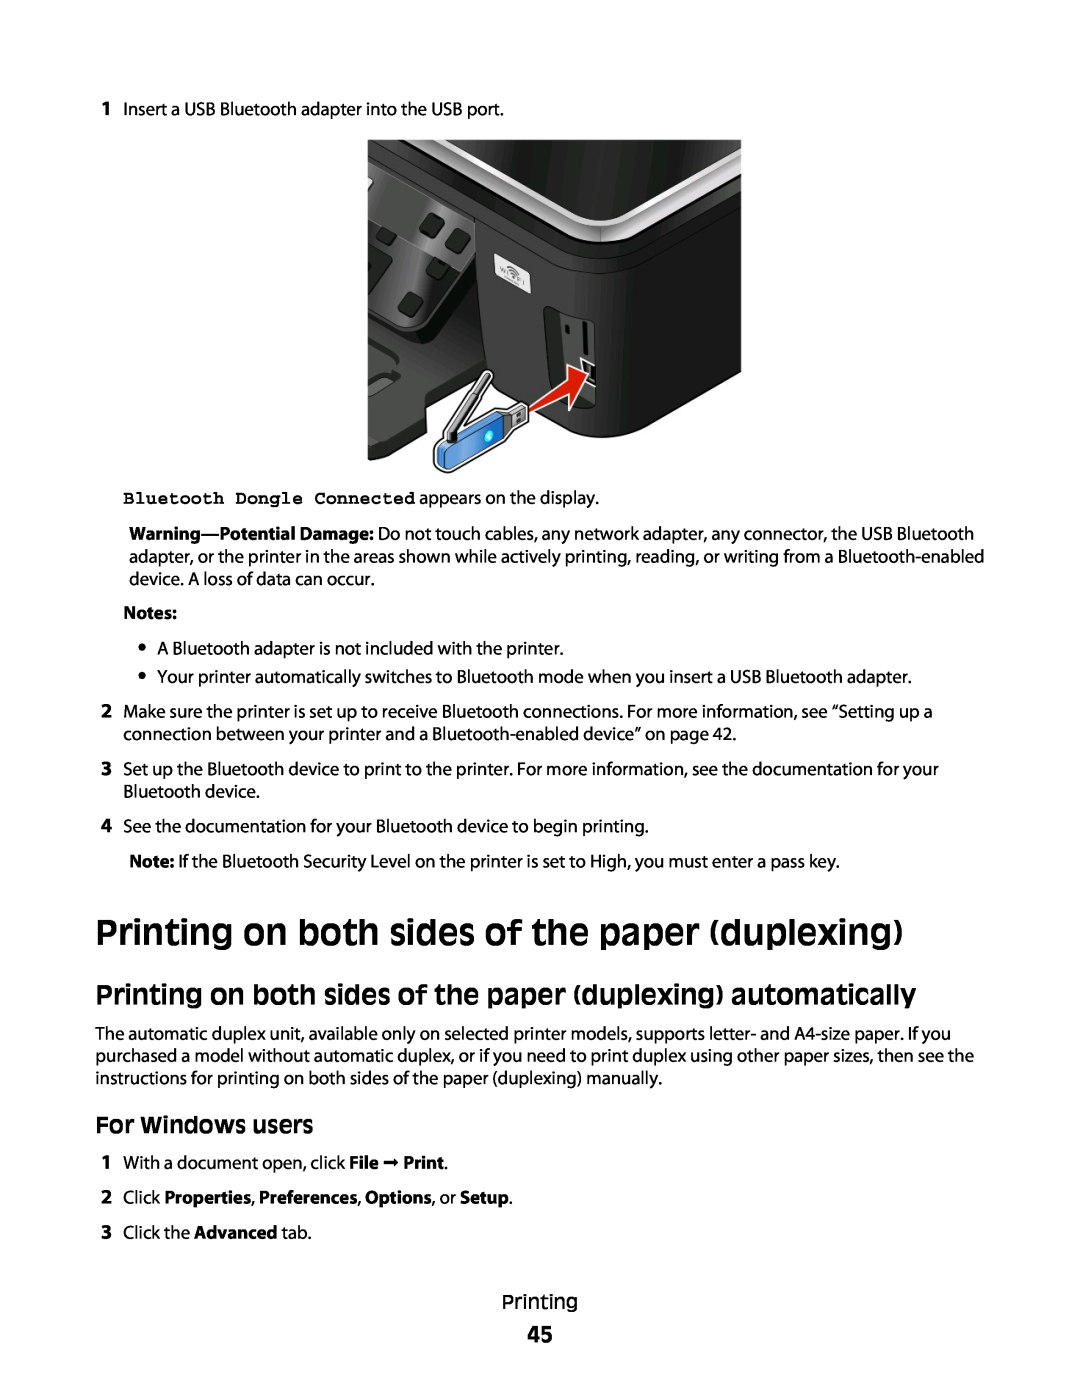 Lexmark S500, 30E, 301 manual Printing on both sides of the paper duplexing automatically, For Windows users 